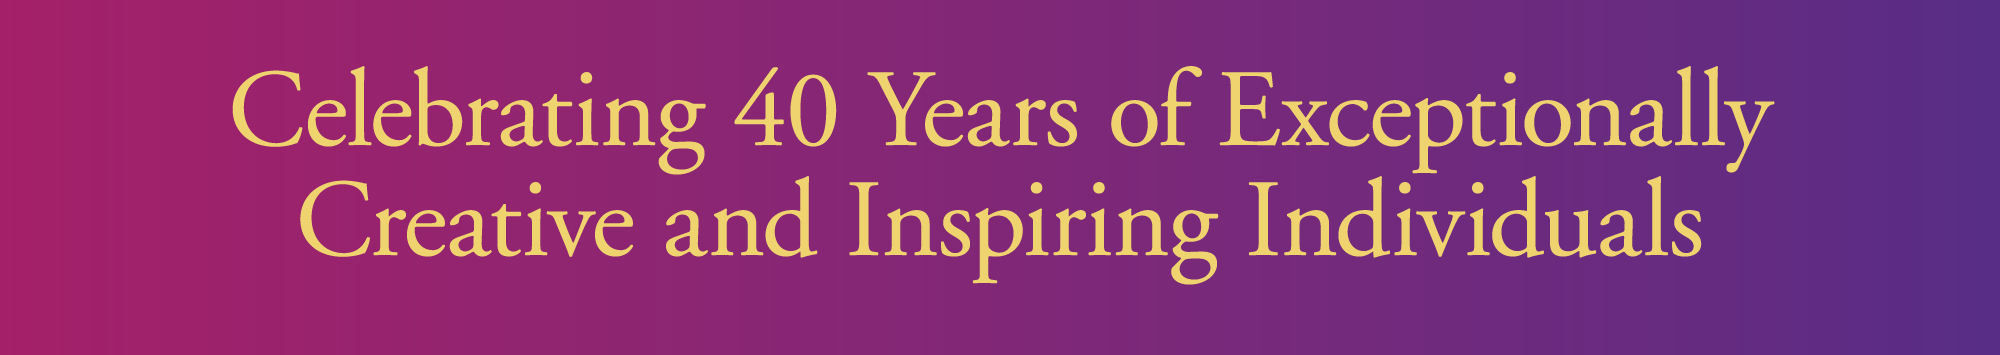 Celebrating 40 years of Exceptionally Creative and Inspiring Individuals